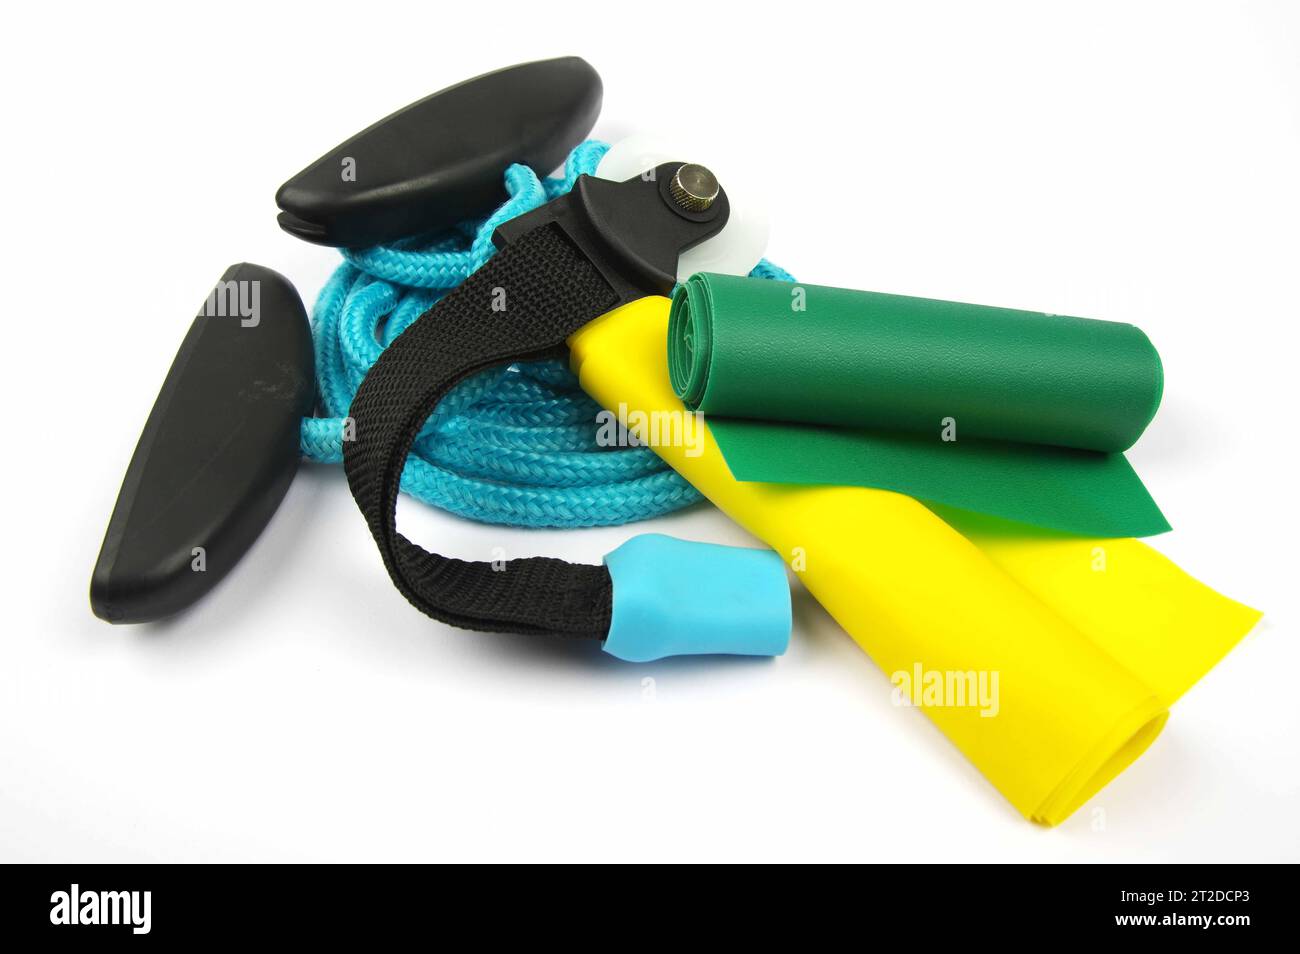 training aid assortment for physiotherapy and fitness training on a white background Stock Photo